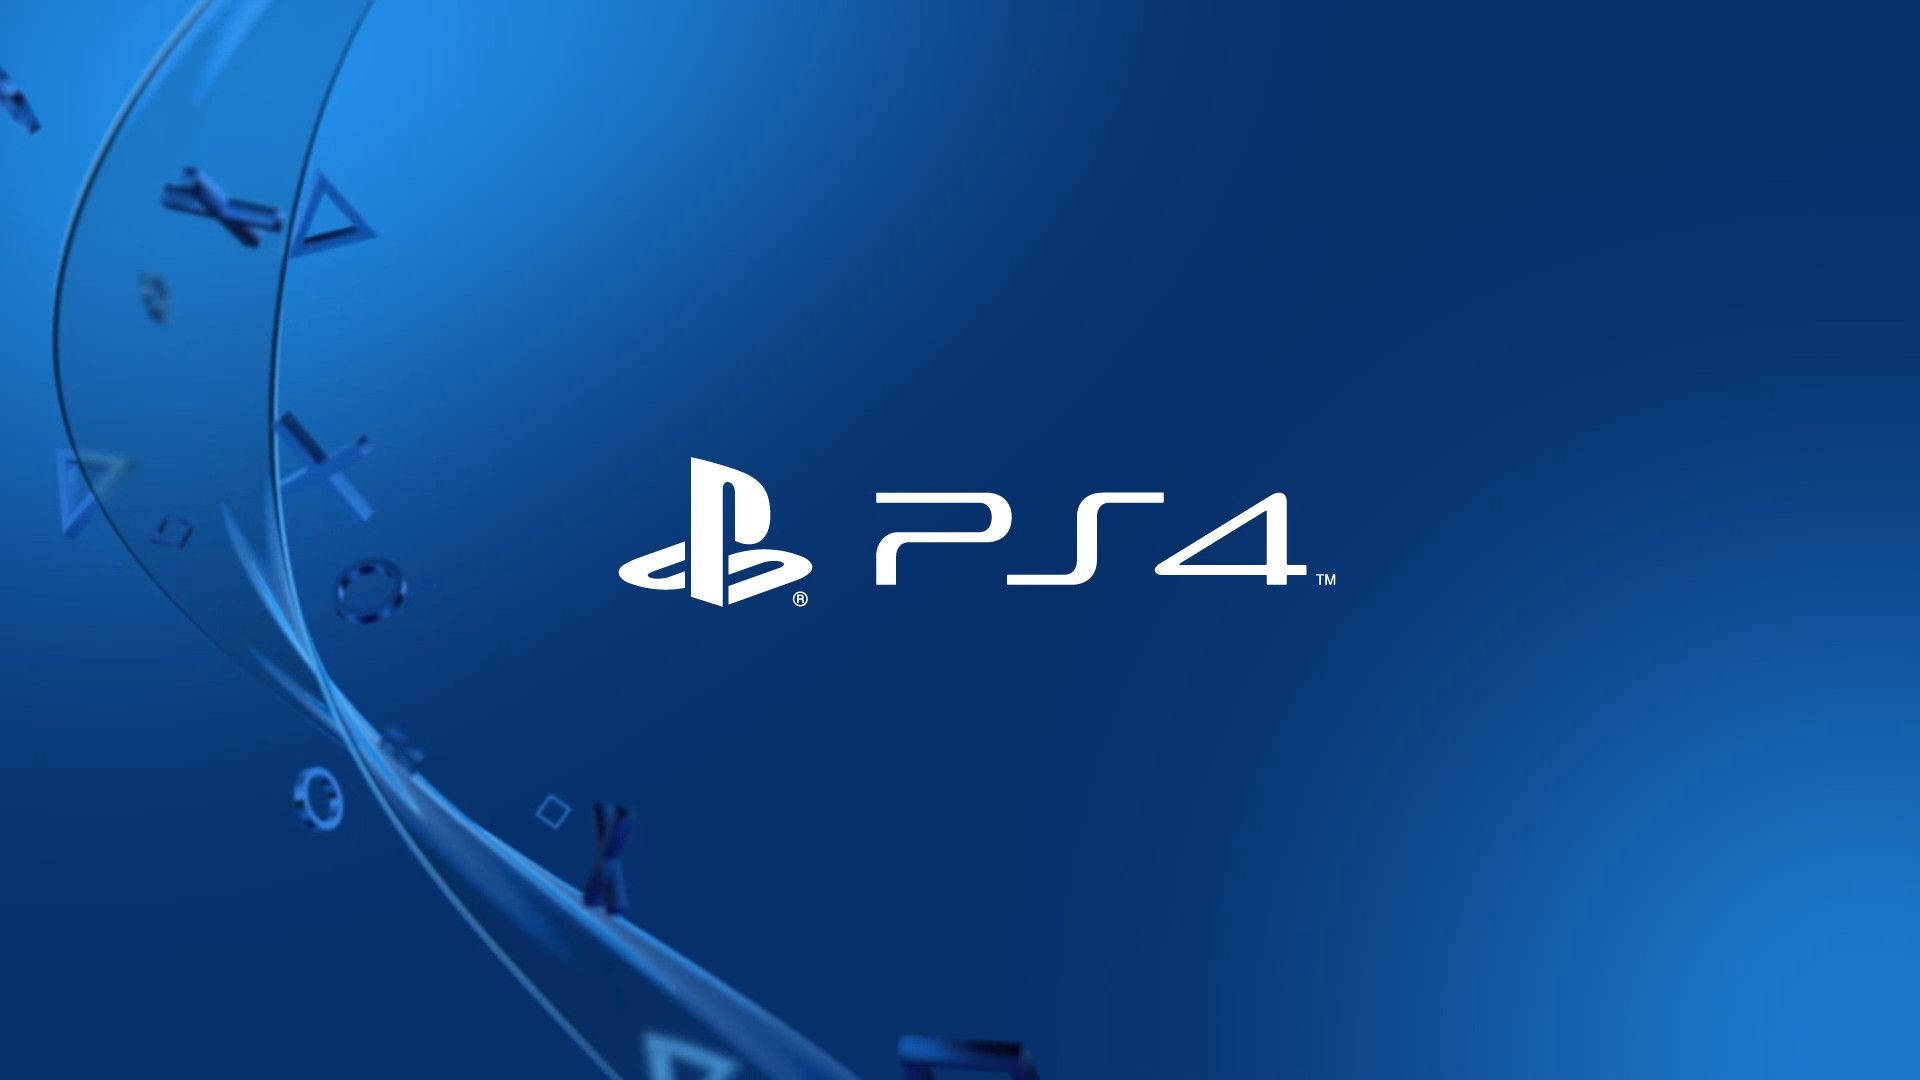 Ps4 Pictures Wallpaper